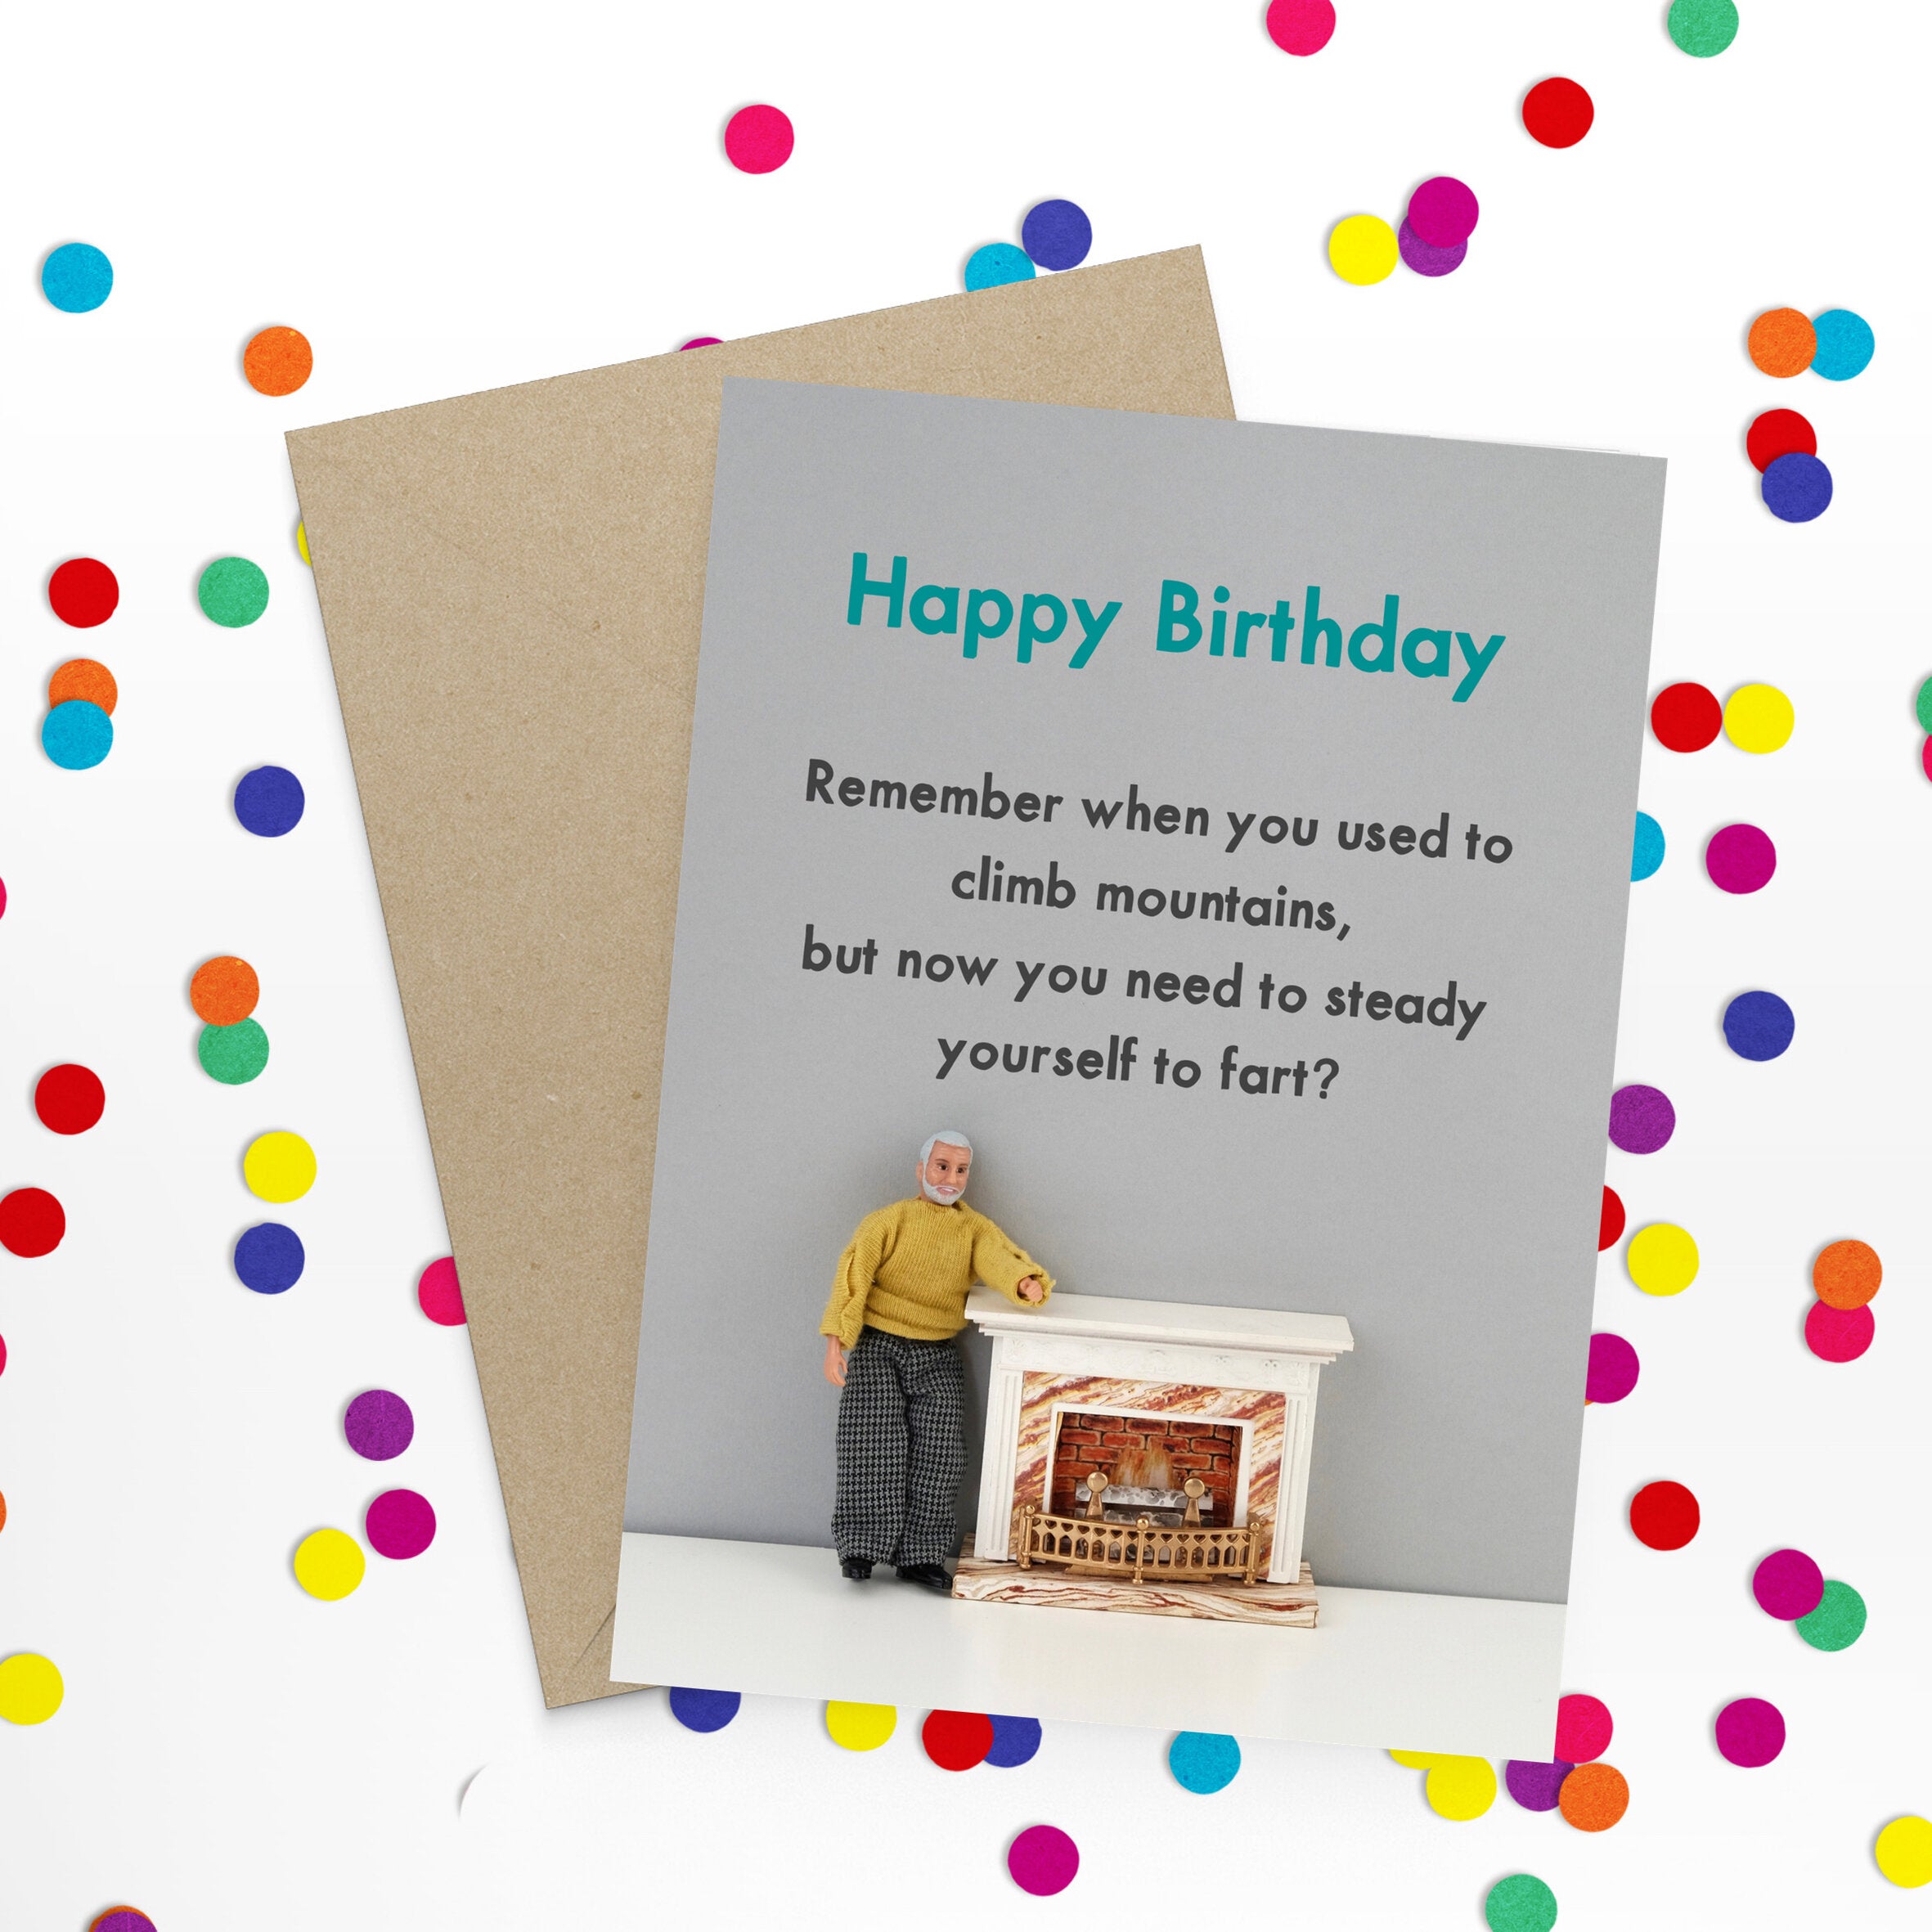 Remember When You Used To Climb Mountains Birthday Greetings Card by Bold and Bright